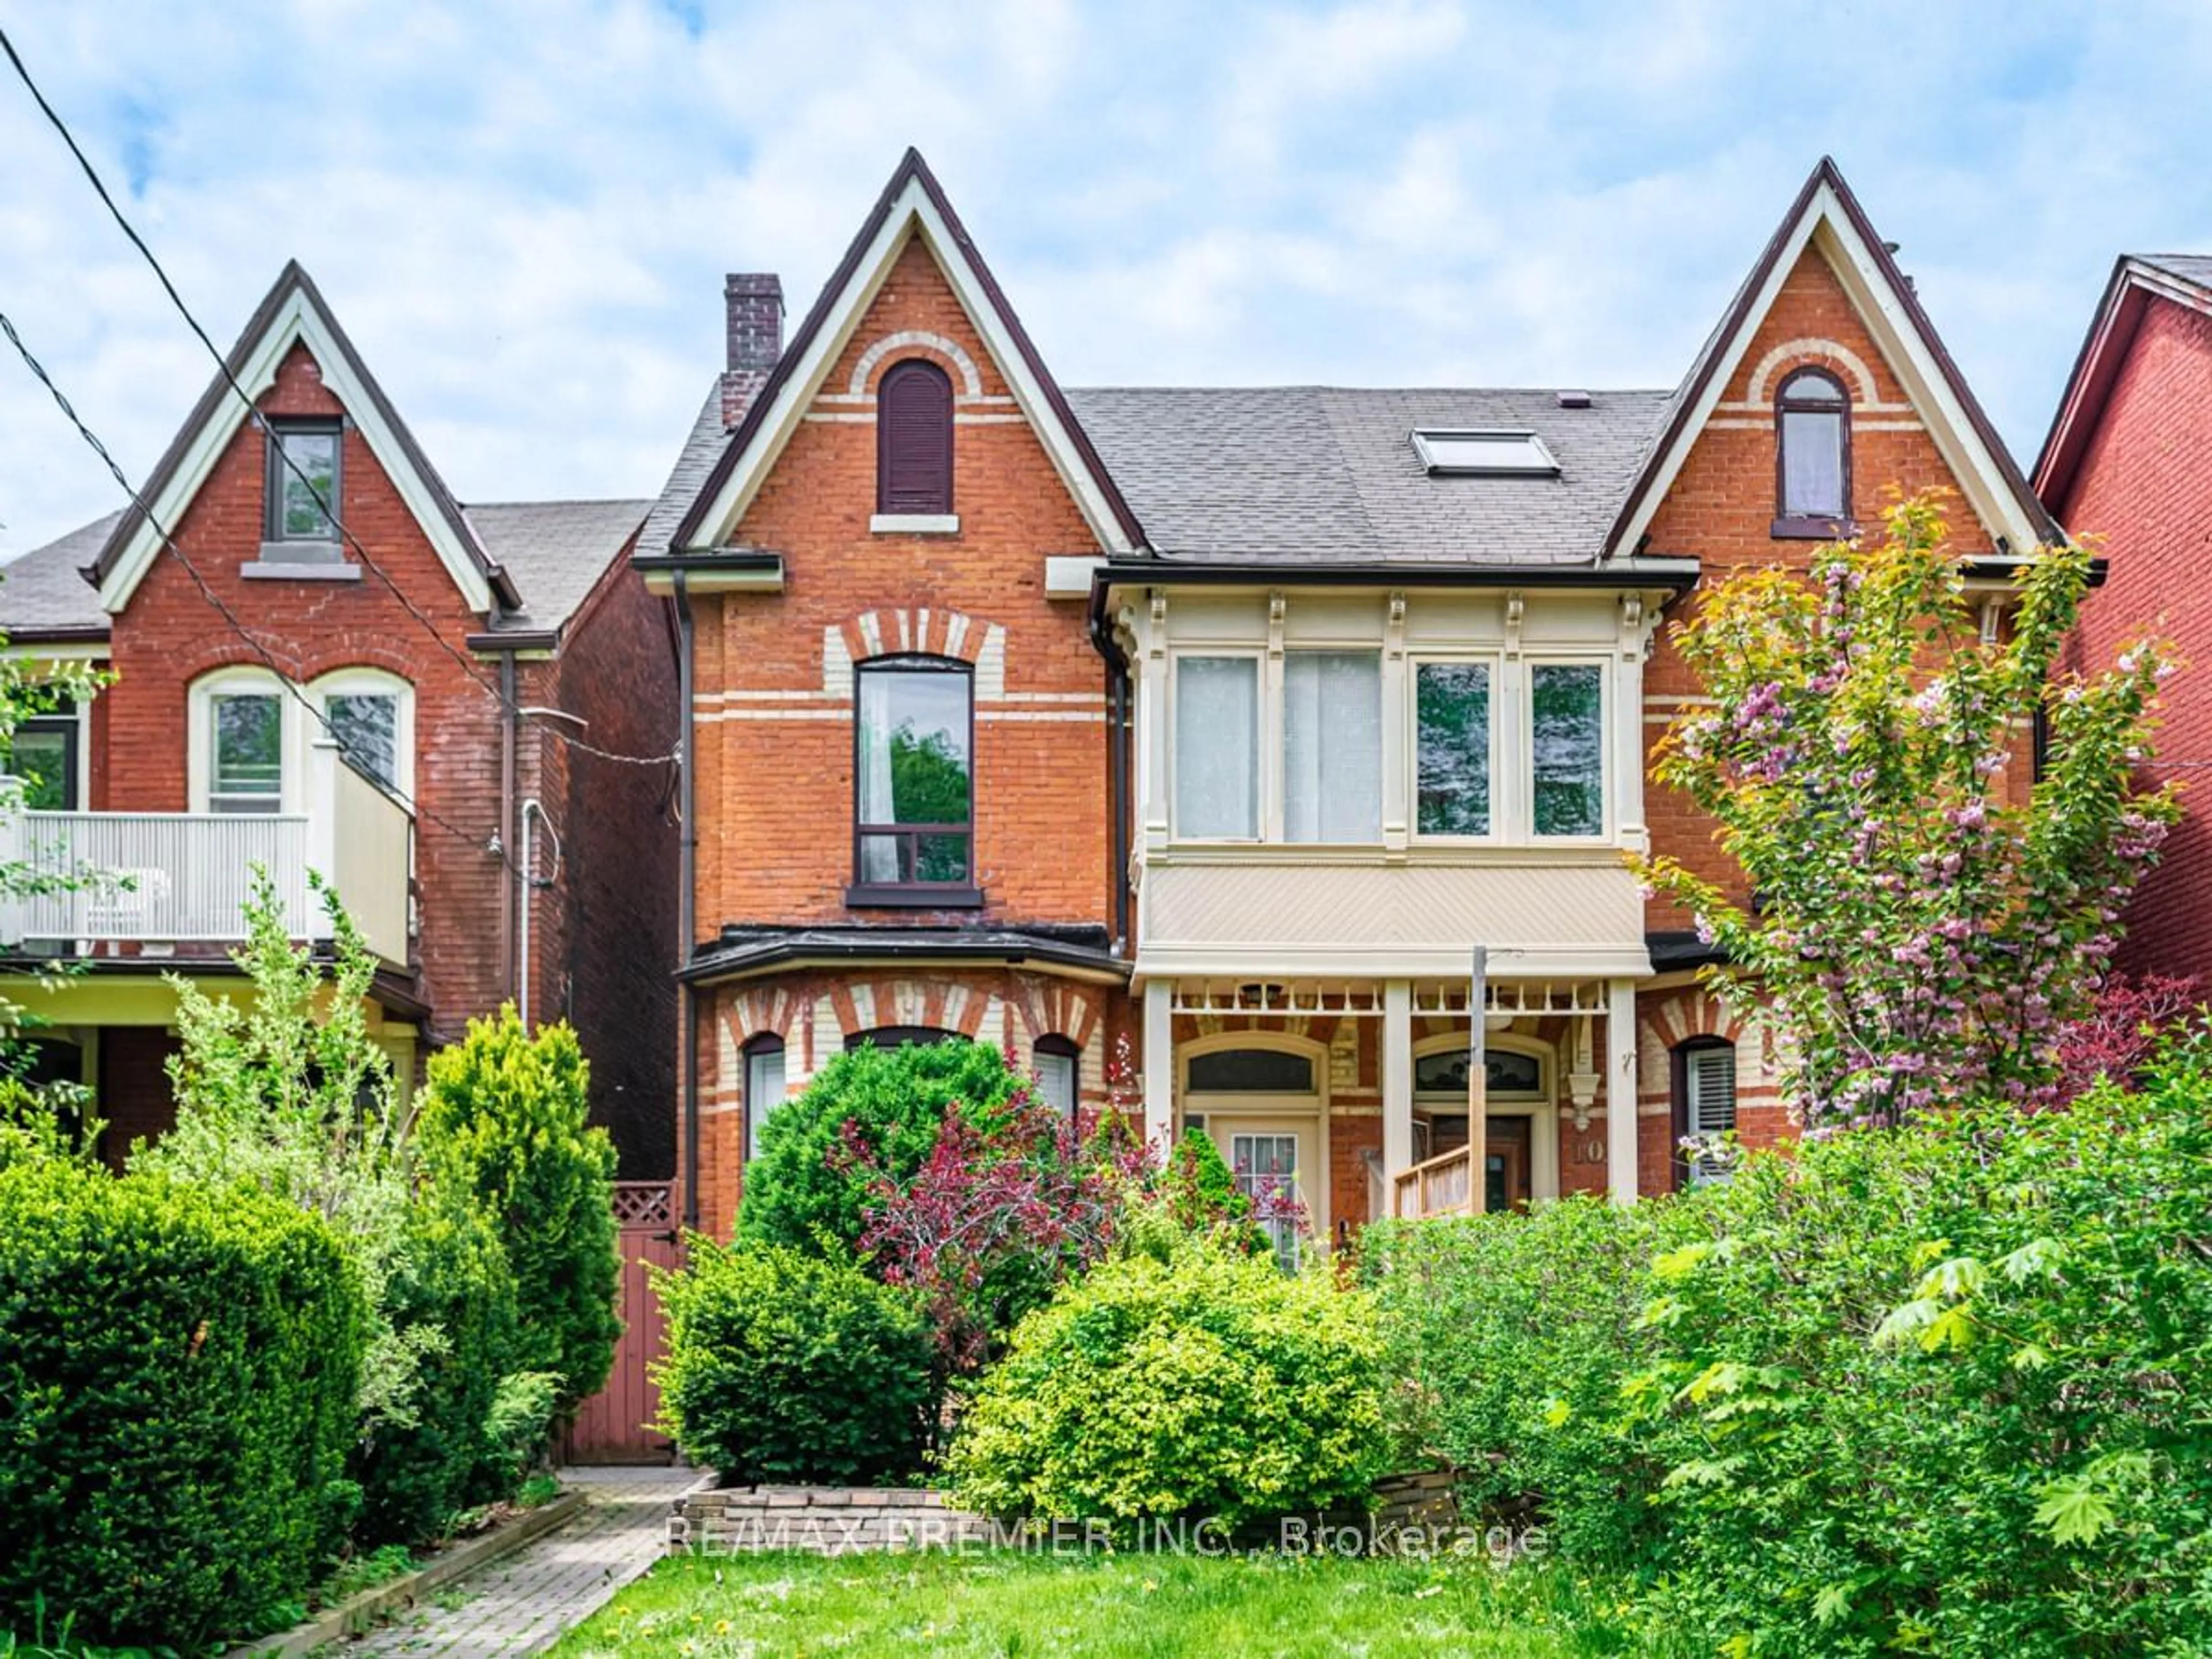 Home with brick exterior material for 102 Bellevue Ave, Toronto Ontario M5T 2N9